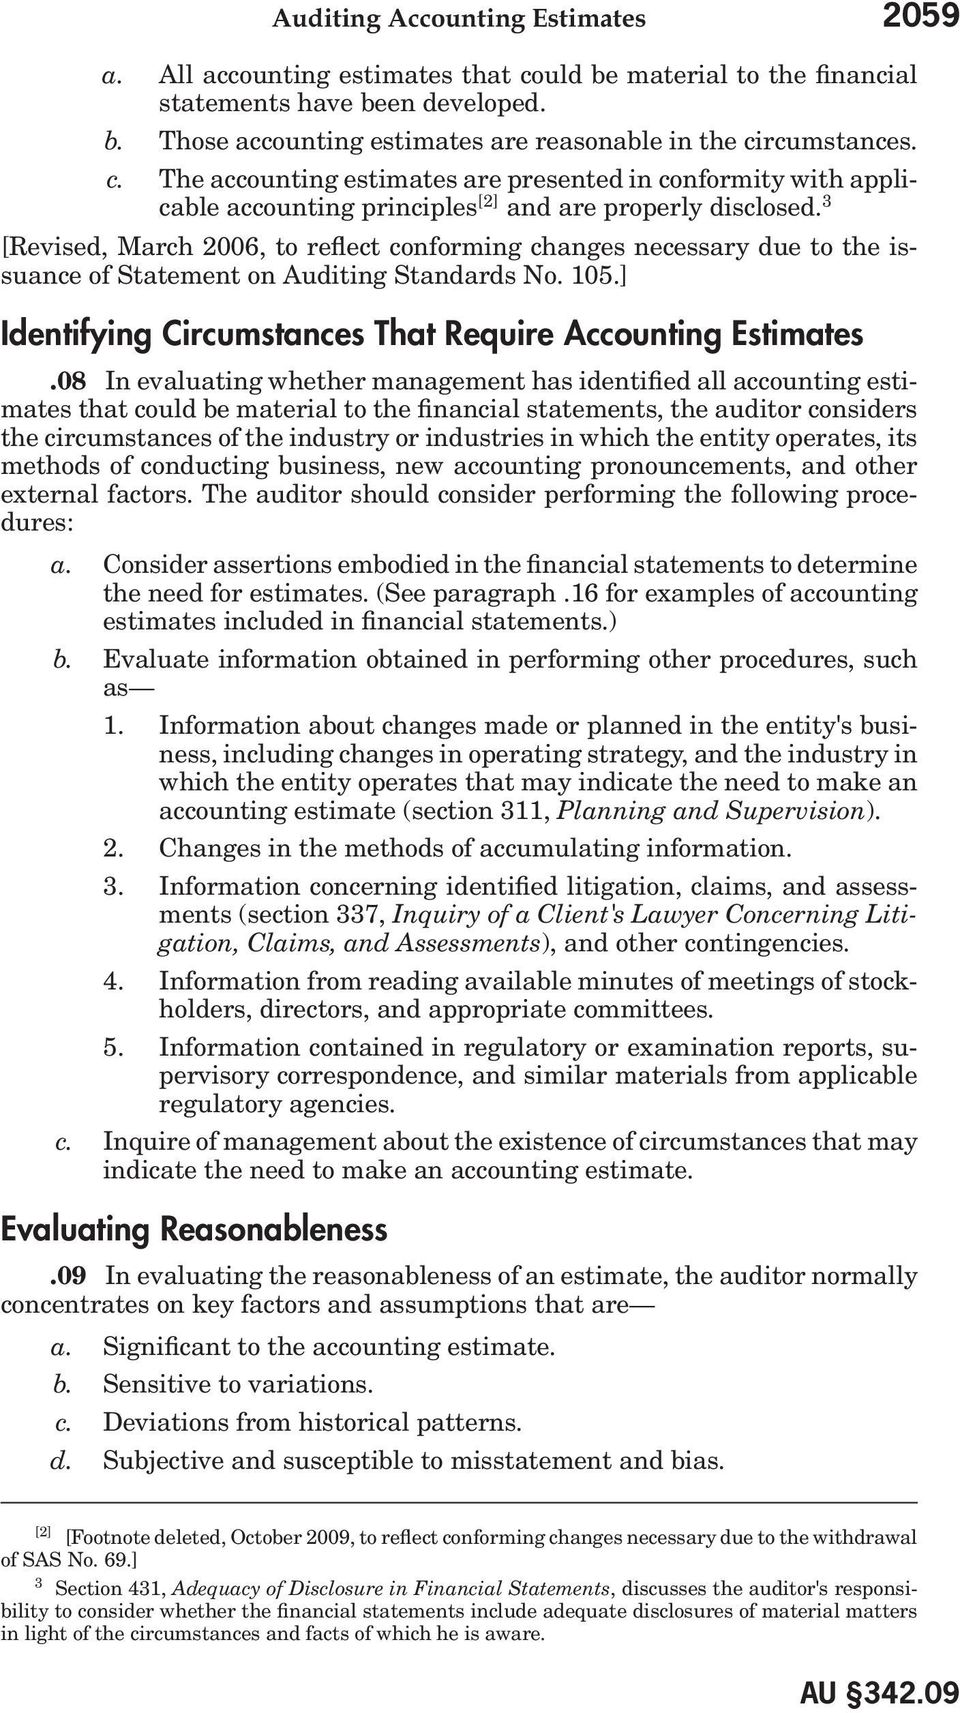 3 [Revised, March 2006, to reflect conforming changes necessary due to the issuance of Statement on Auditing Standards No. 105.] Identifying Circumstances That Require Accounting Estimates.